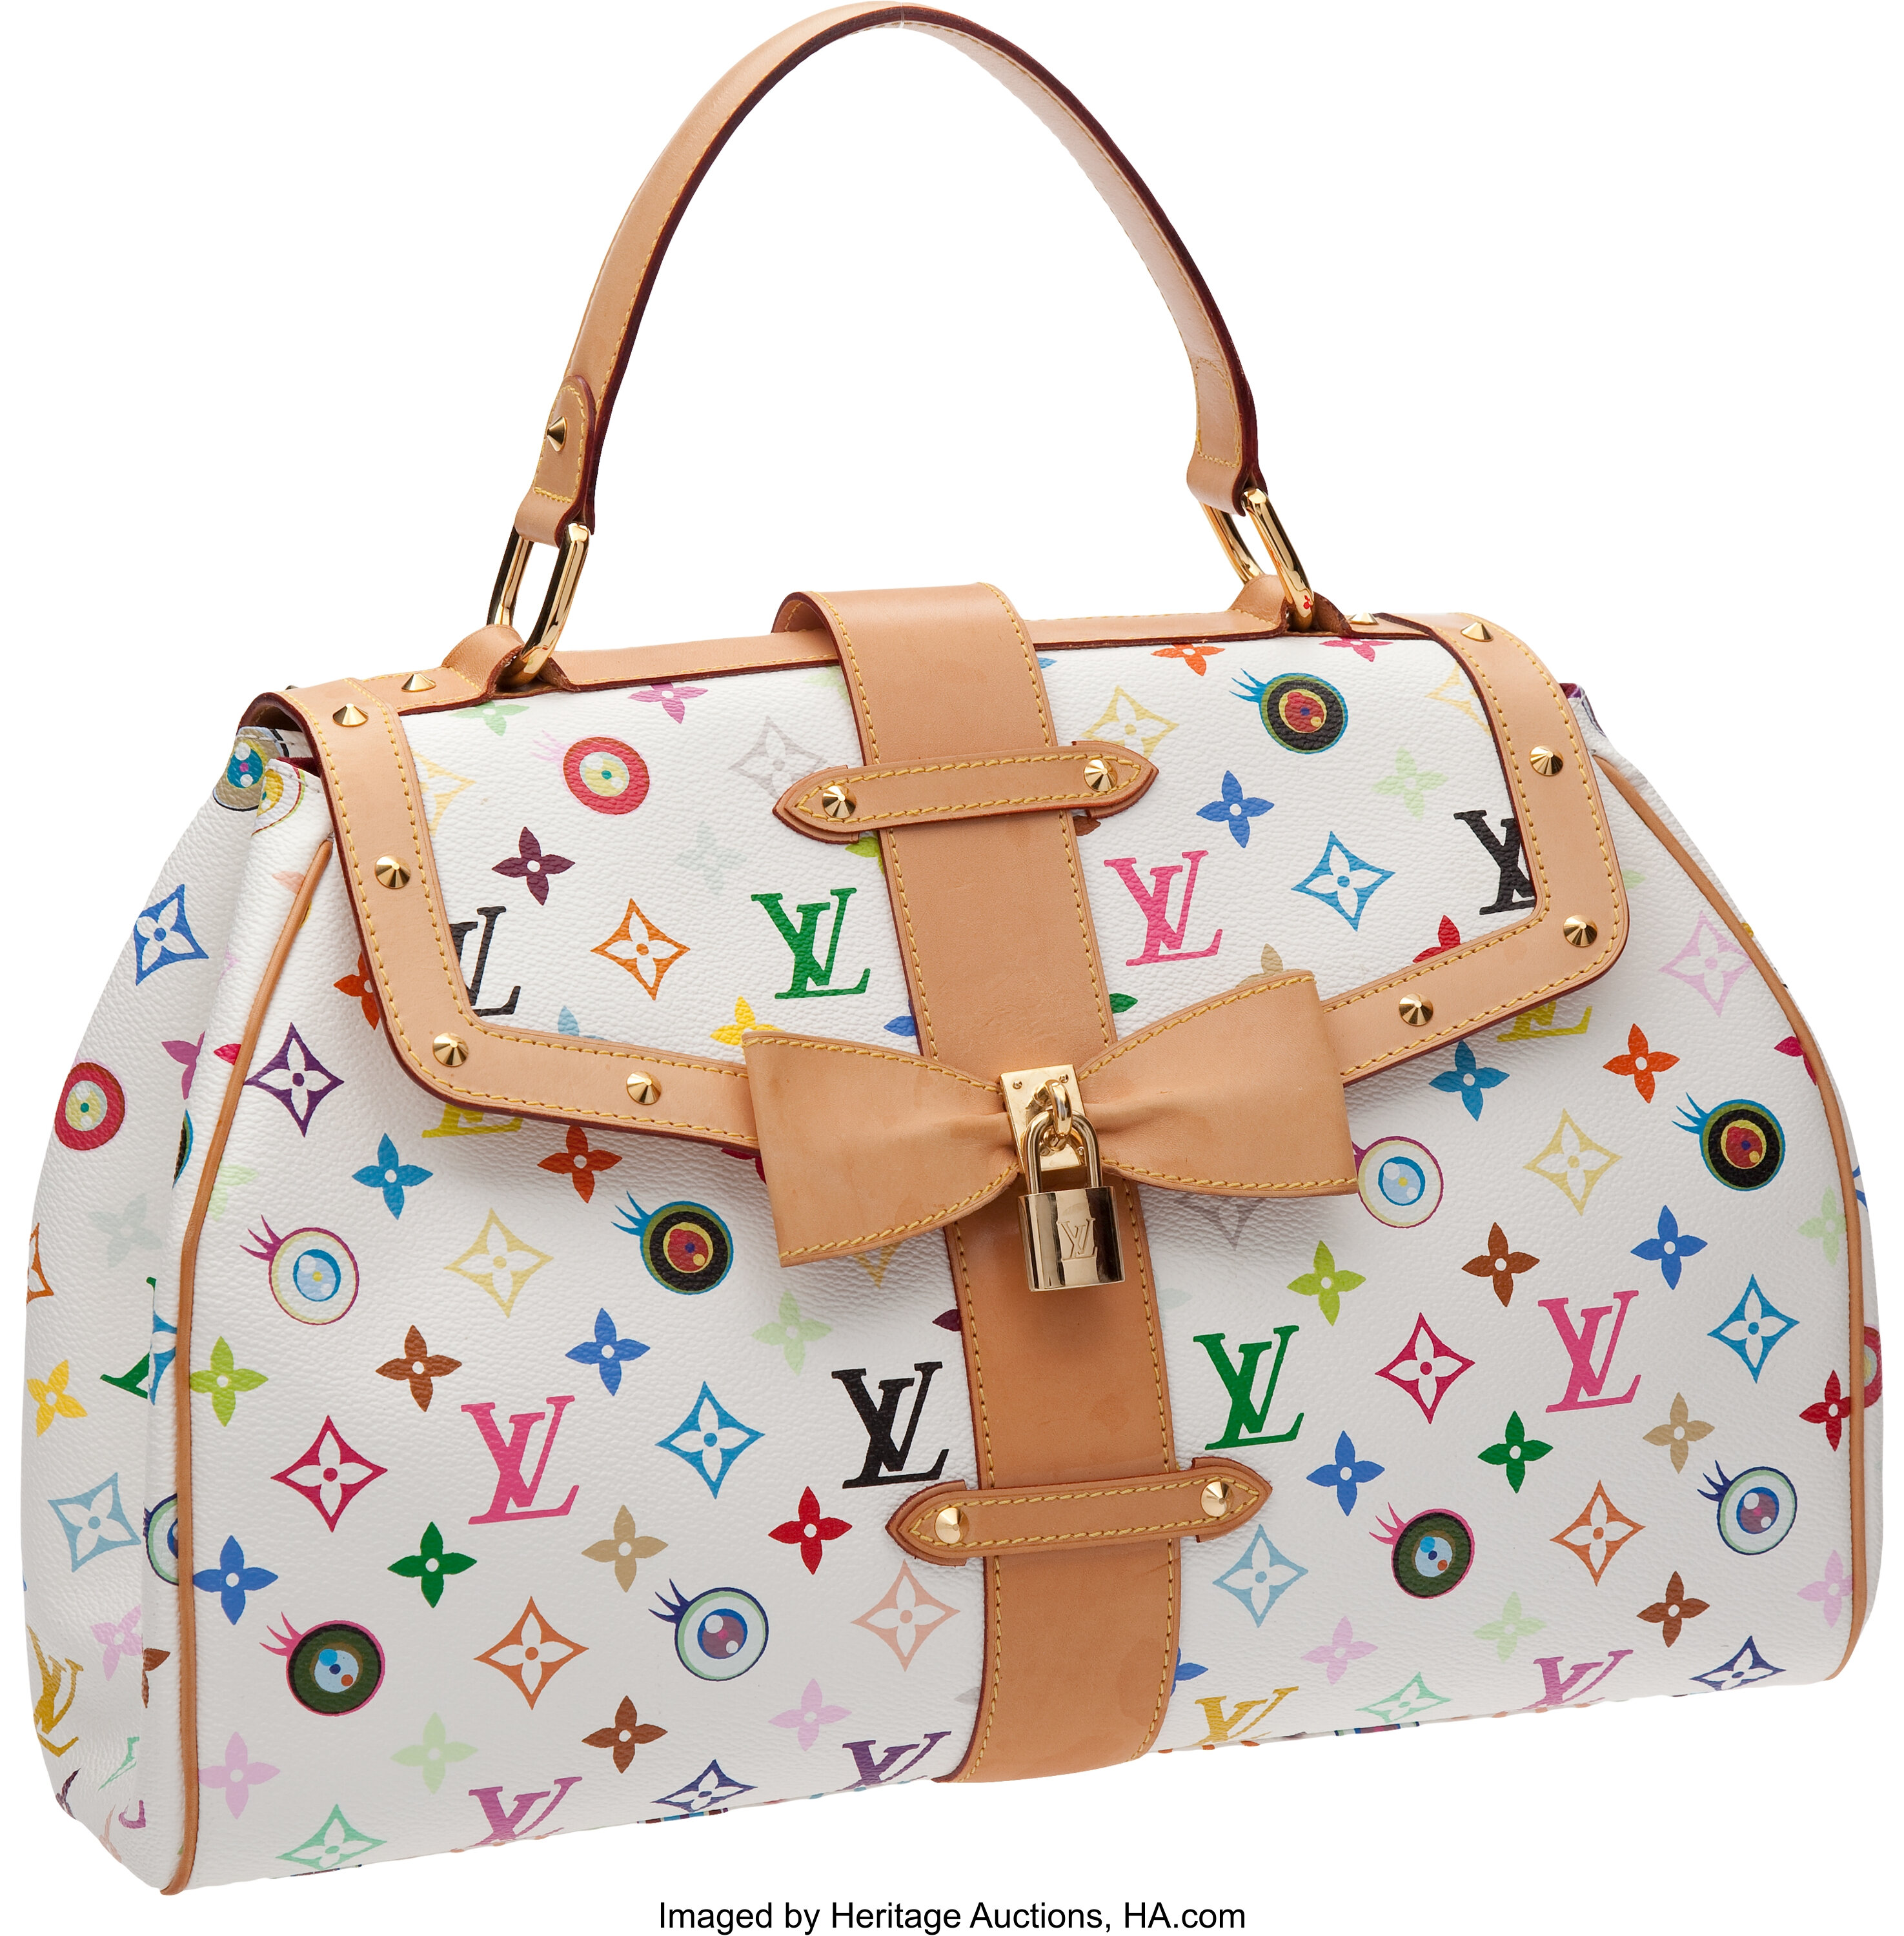 Louis Vuitton by Takashi Murakami & Marc Jacobs 2003 Limited, | Lot #58590 | Heritage Auctions